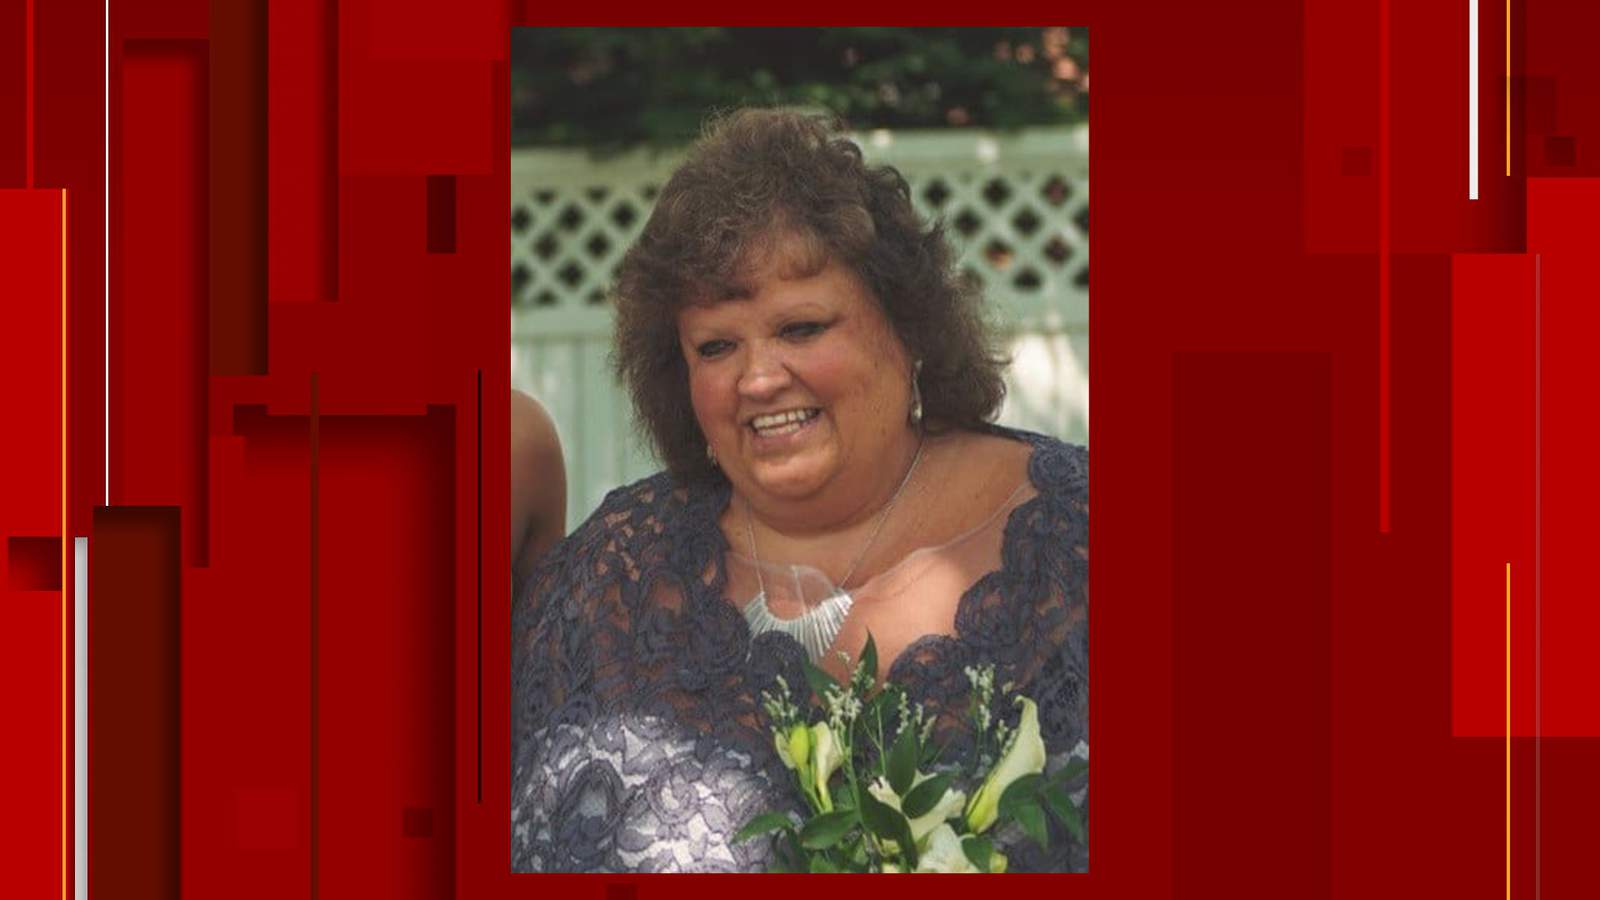 Authorities find body inside car of missing Nelson County woman